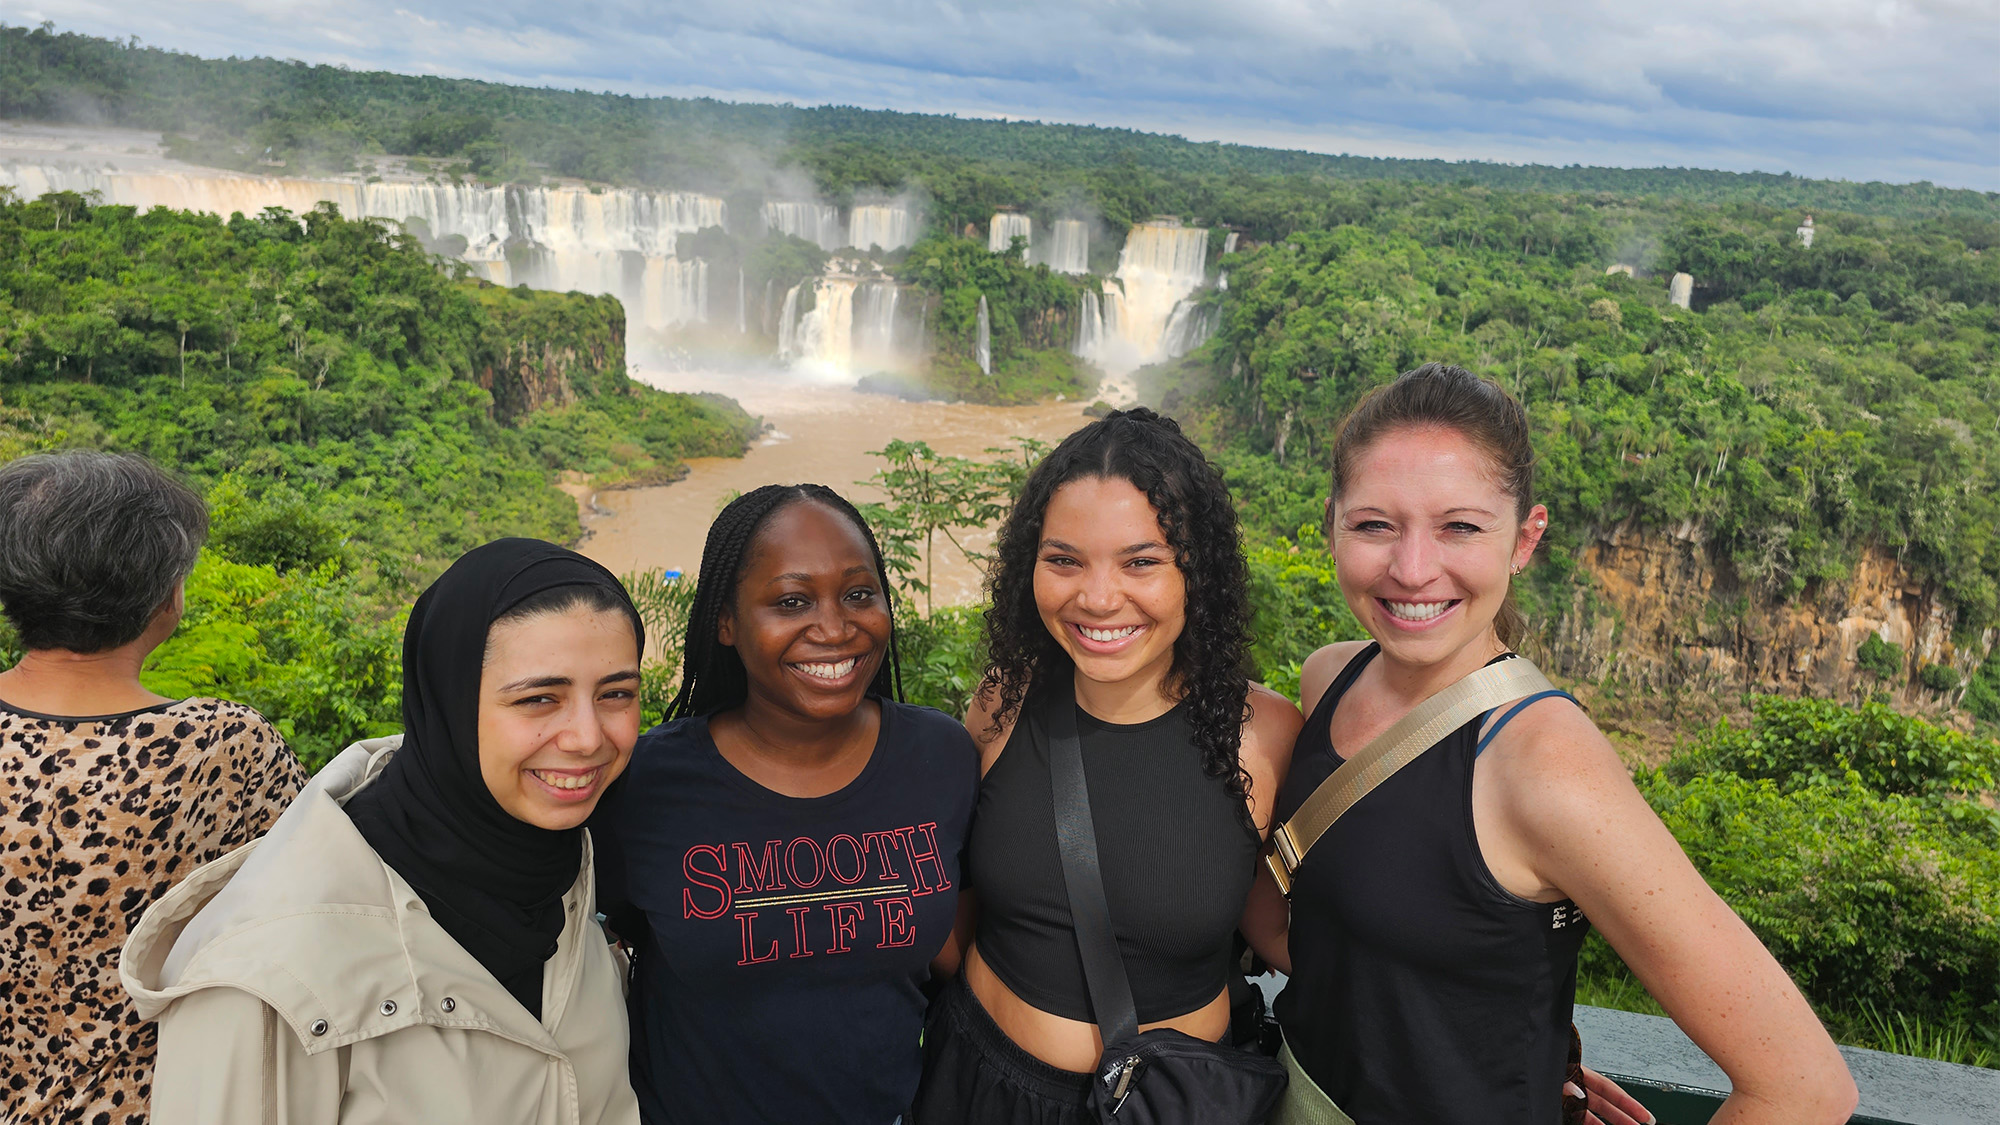 Students stand with Iguazu Falls in the background